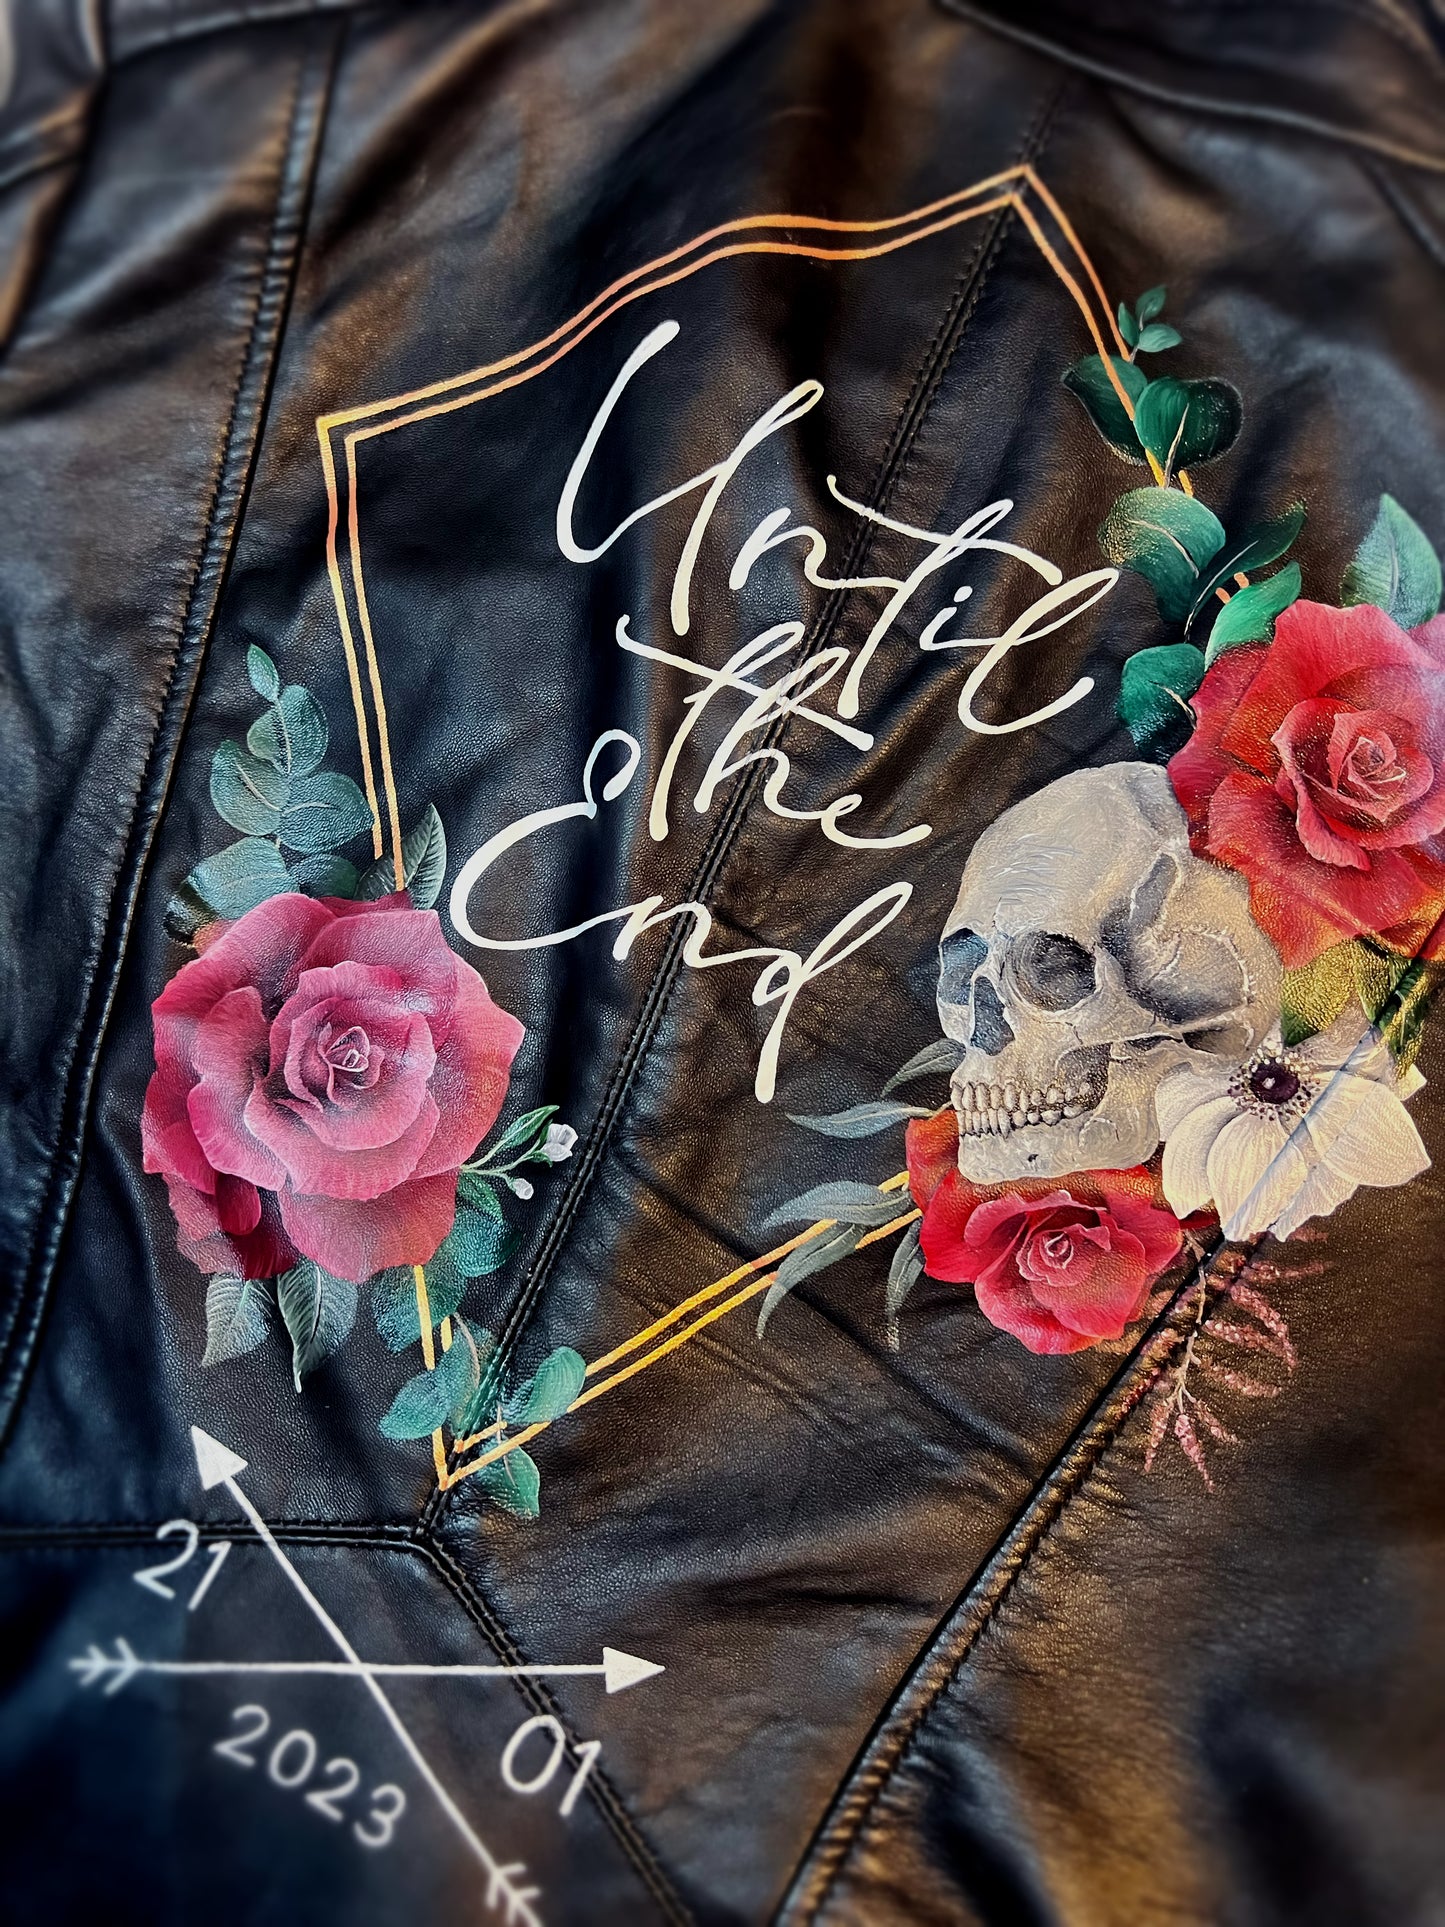 Hand Painted Leather Jacket. Geometric Skull Design. Painting only